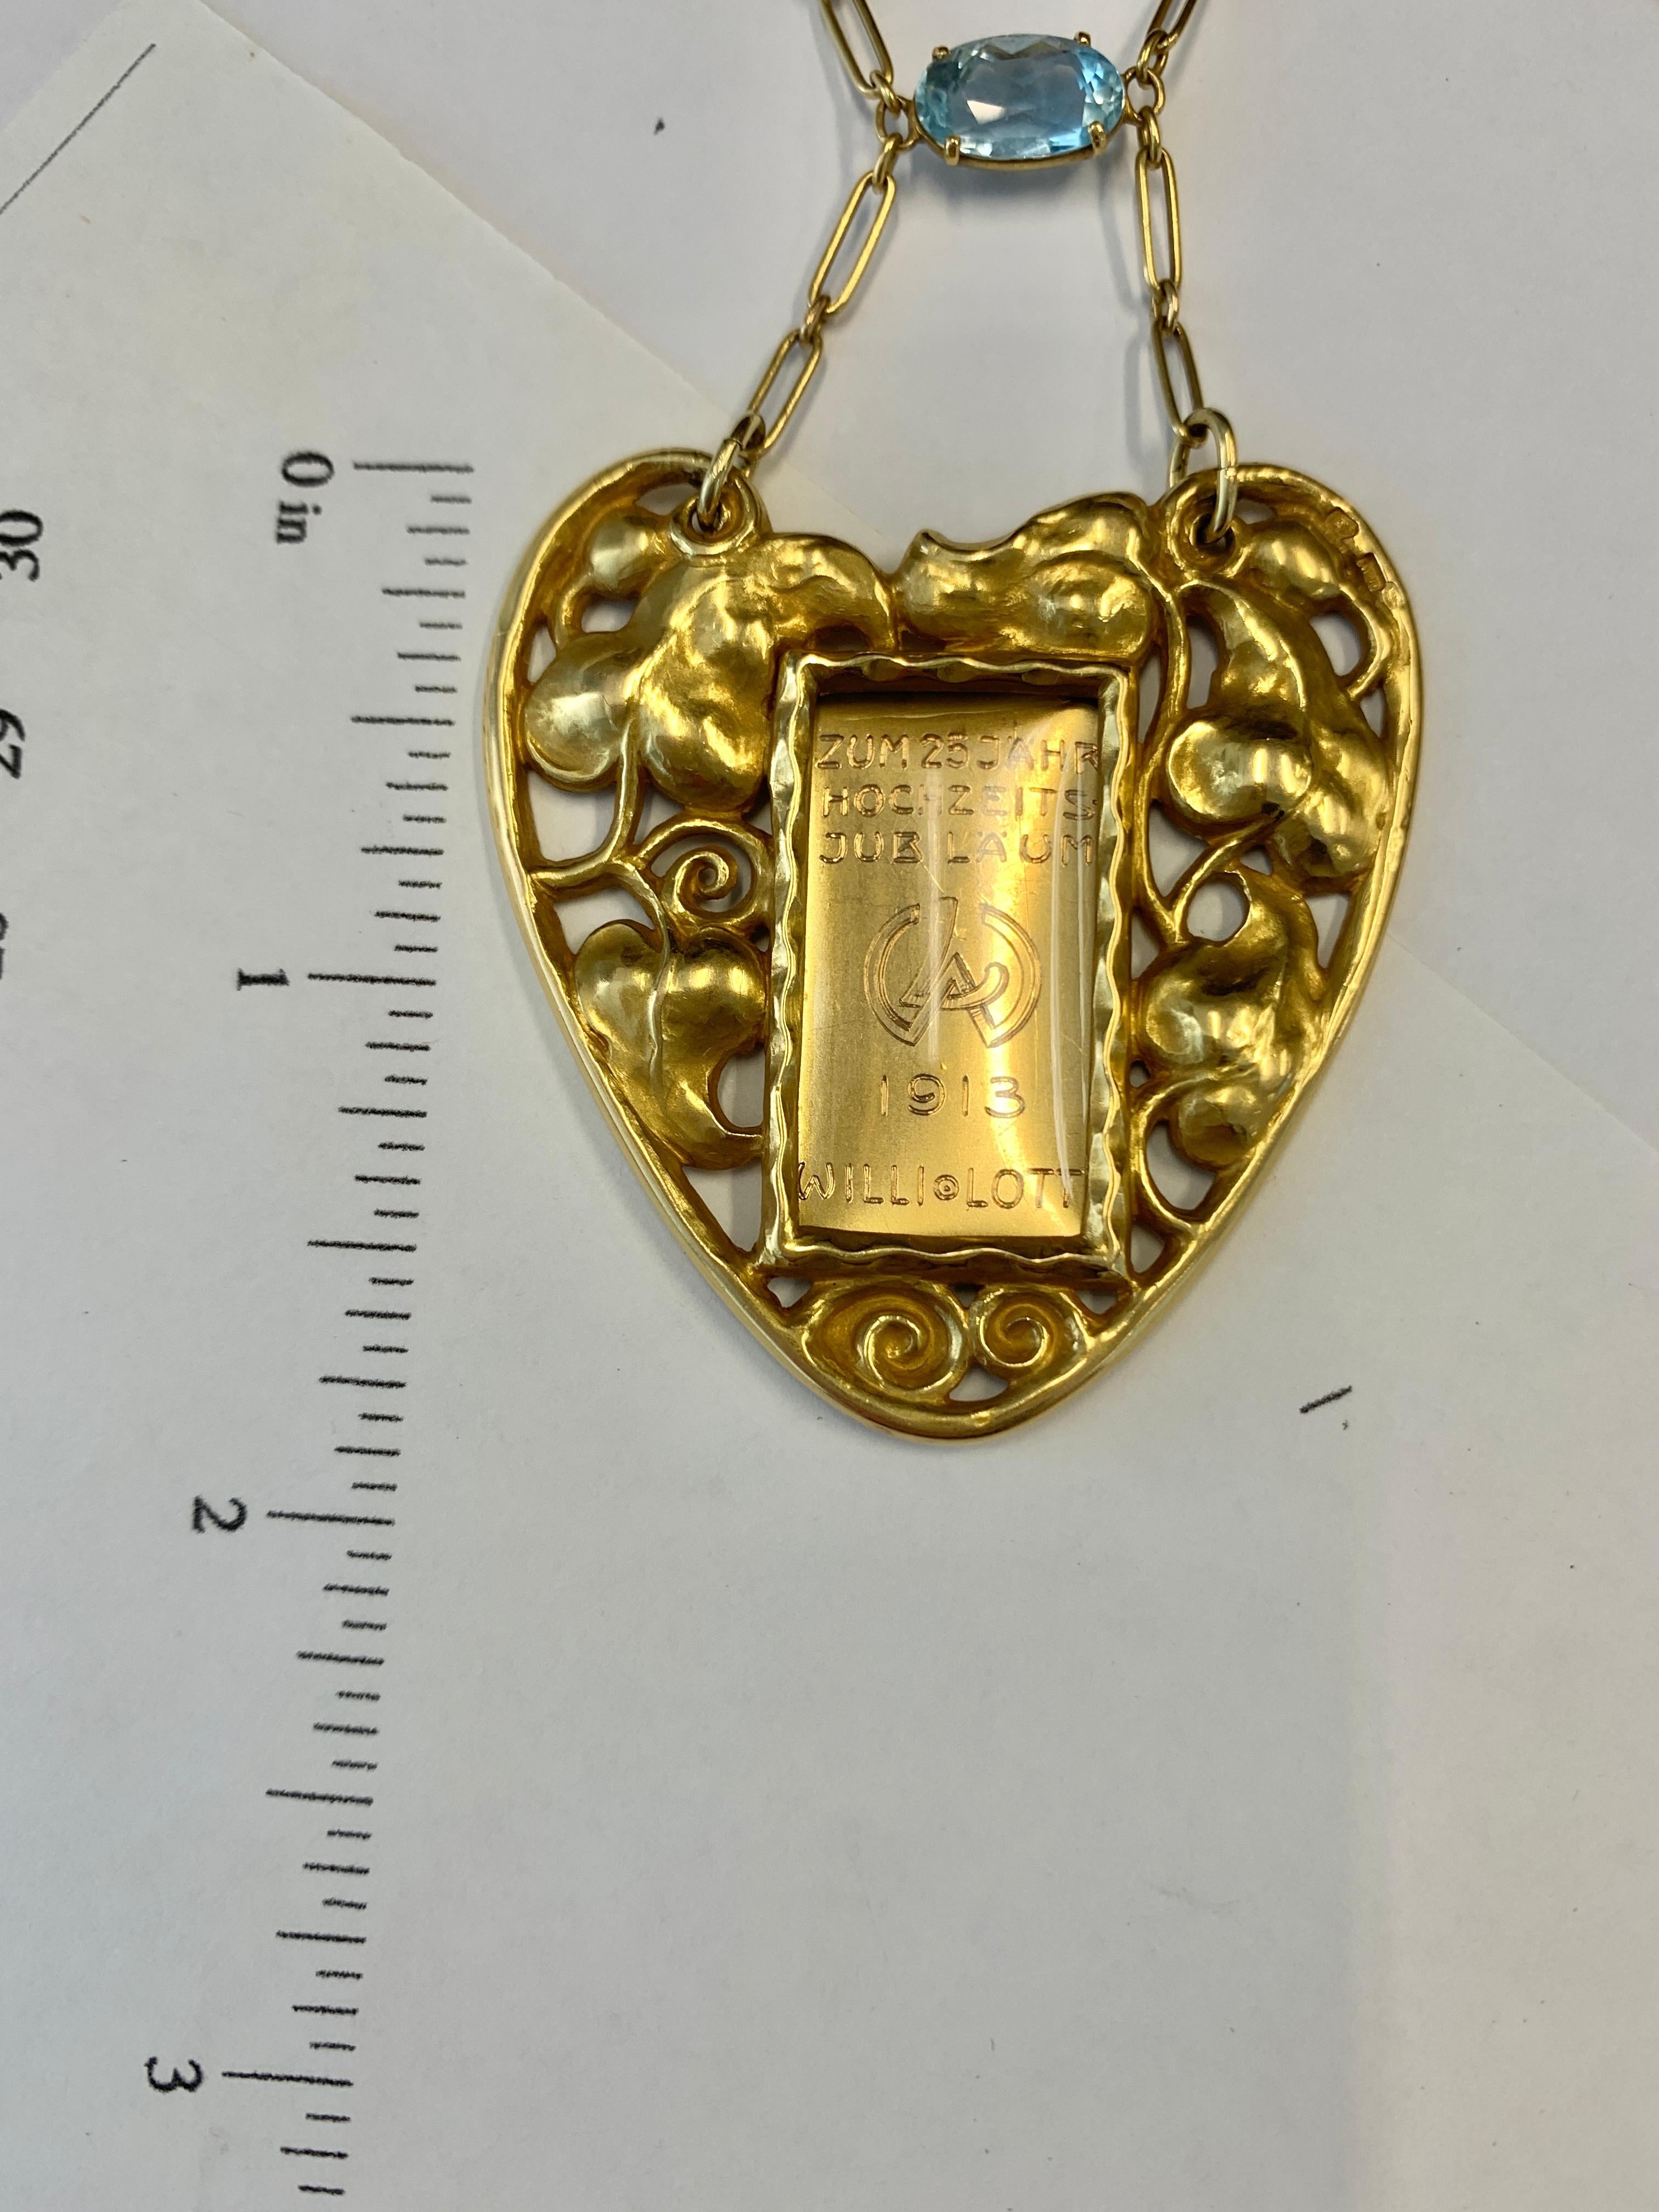 !8kt Gold heart-form necklace pendant with scrolling leaf and vine motifs, centering a glass picture frame with an oval-cut aquamarine (weighing approx. 1.30cts) accent. Engraved on the back with date and inscription. Austro-Hungarian maker's mark